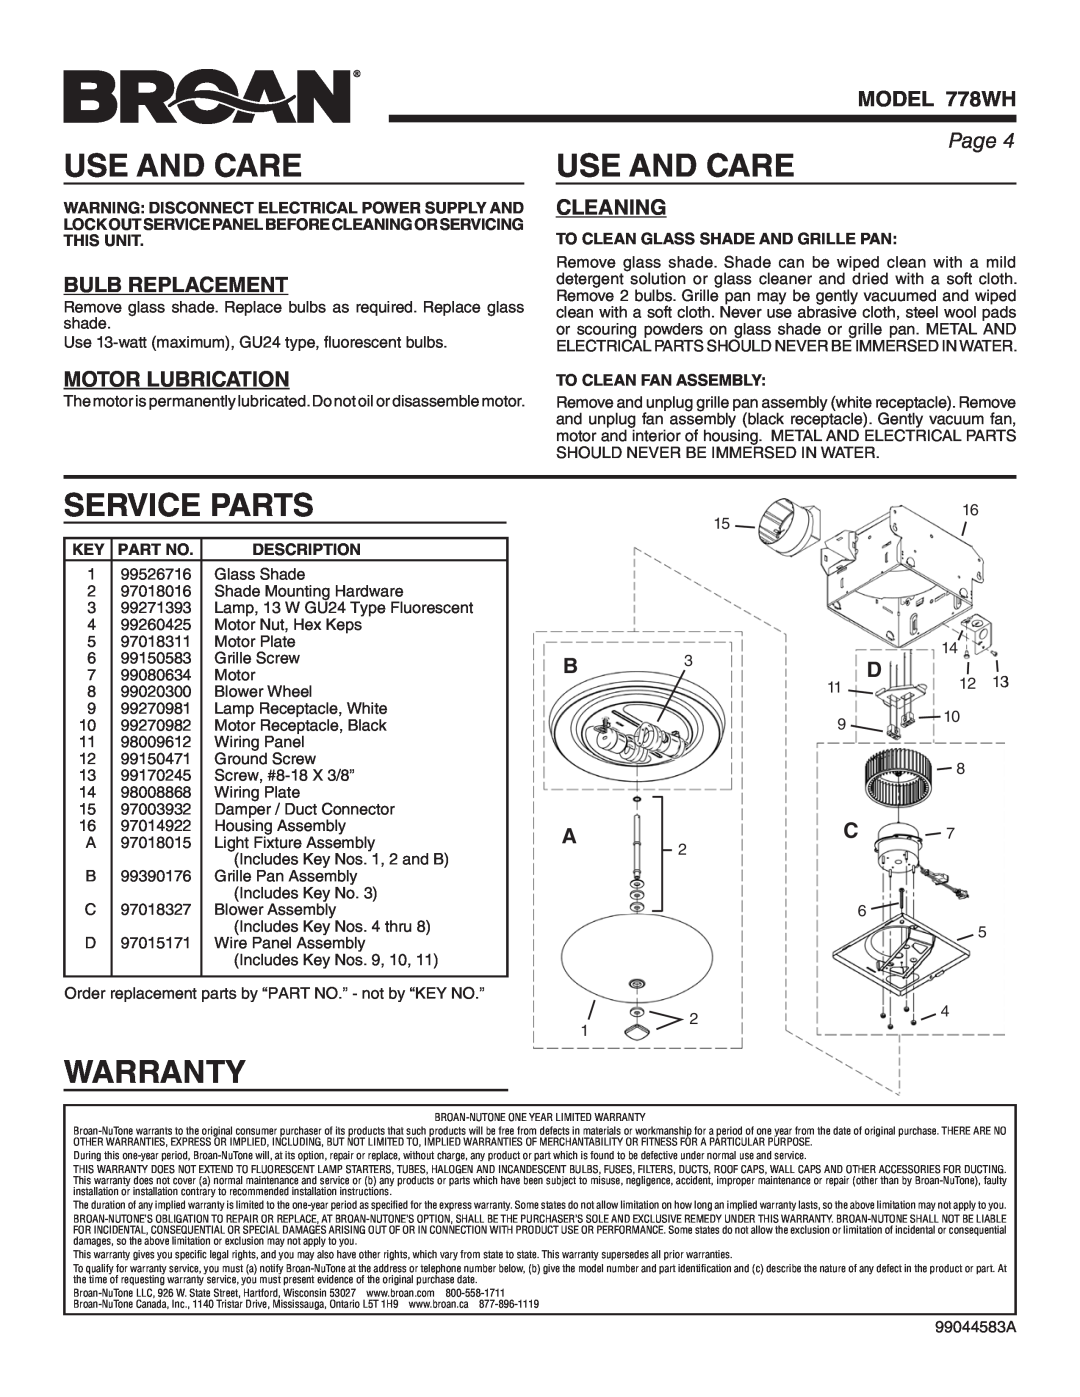 Broan warranty Use And Care, Service Parts, Warranty, Bulb Replacement, Motor Lubrication, Cleaning, MODEL 778WH, Page 